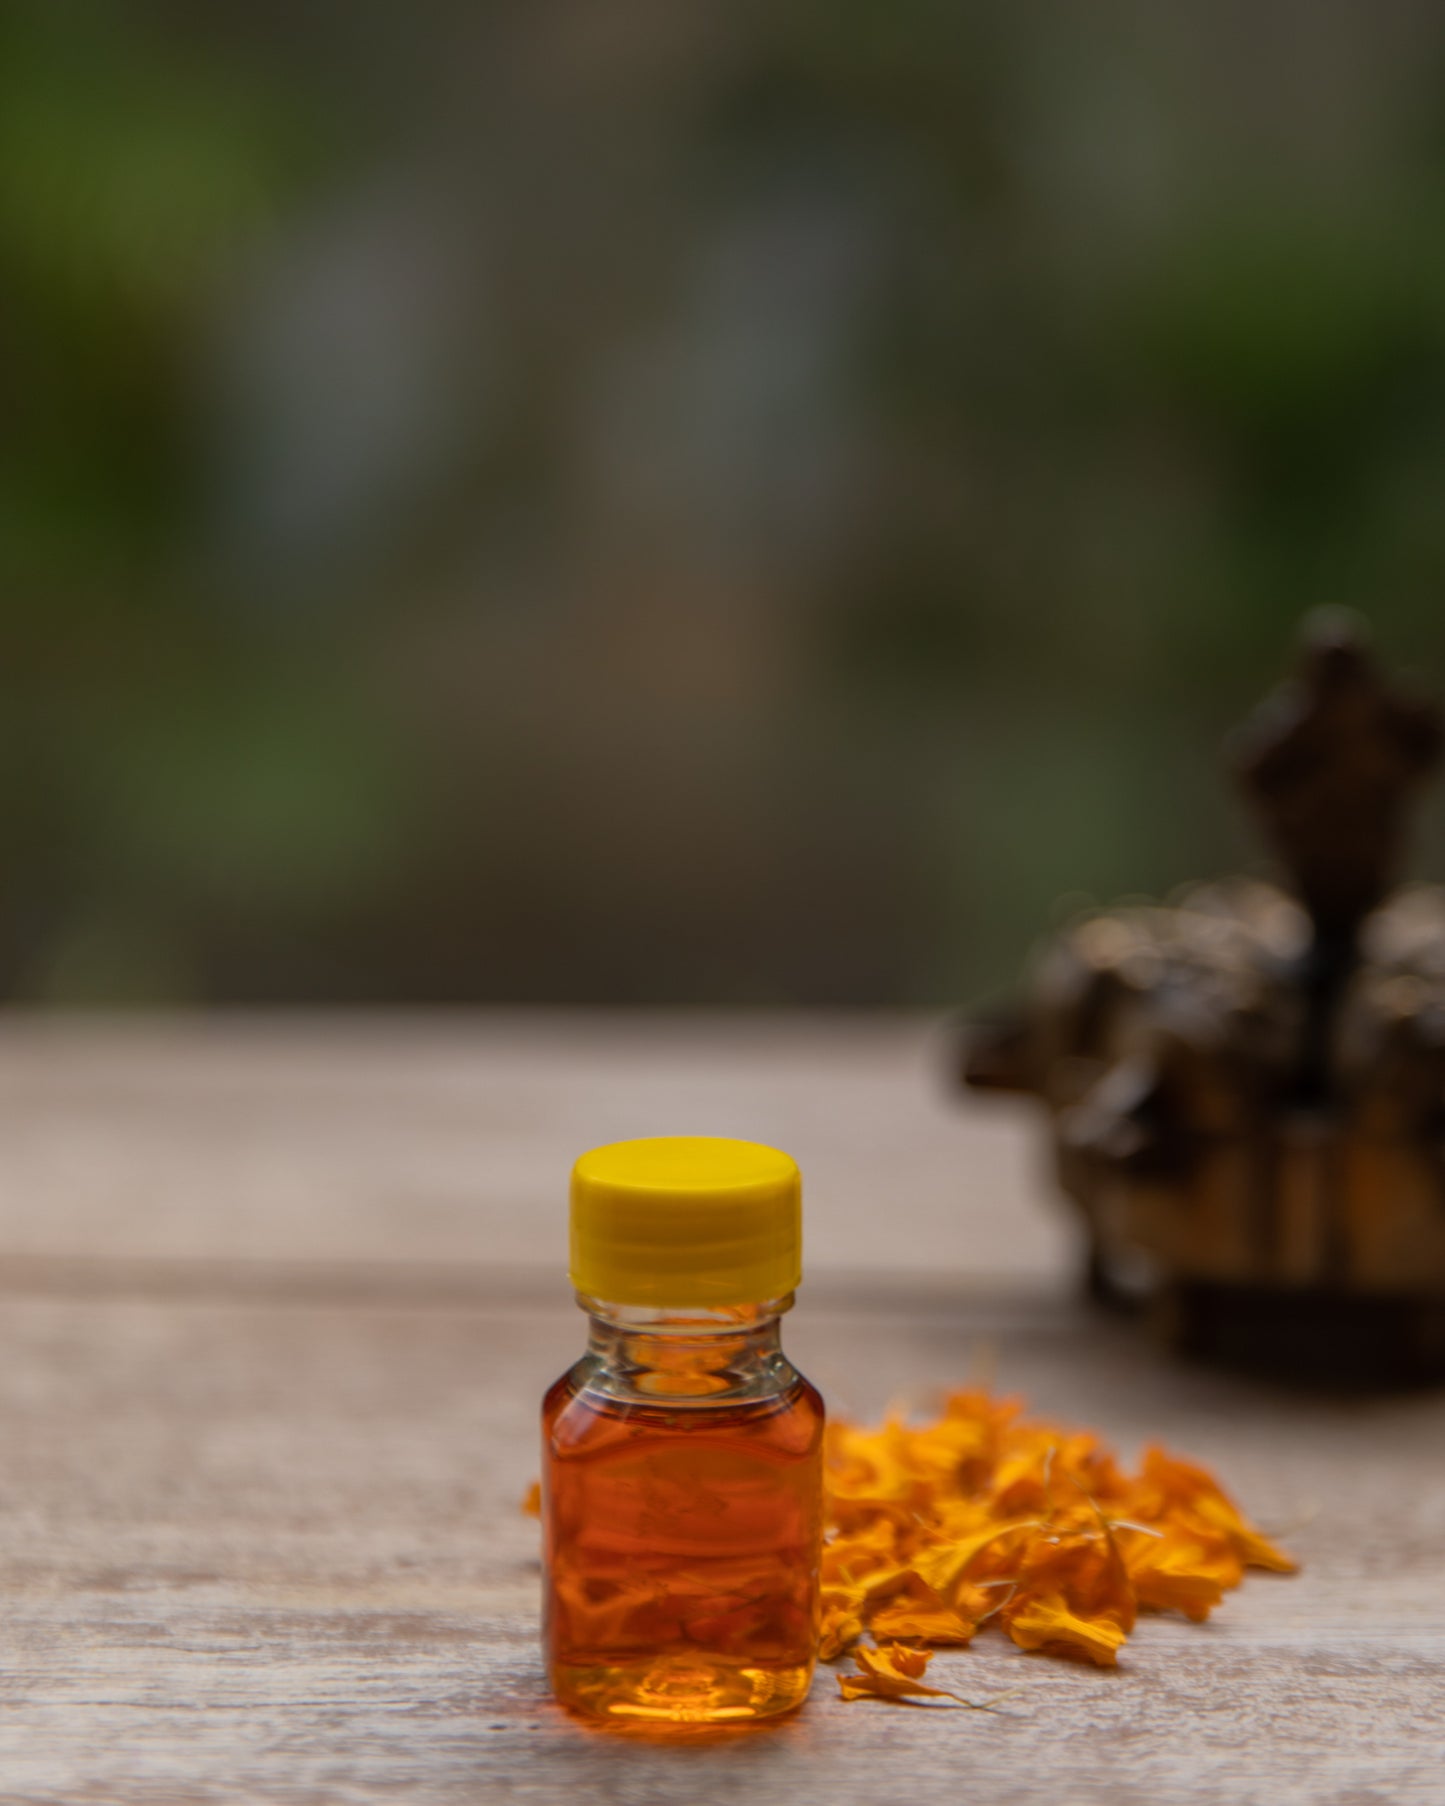 In Ayurveda, honey is a vital element that contributes to the worshipper's physical, mental and spiritual health. Besides, people offer honey to God to seek divine blessings